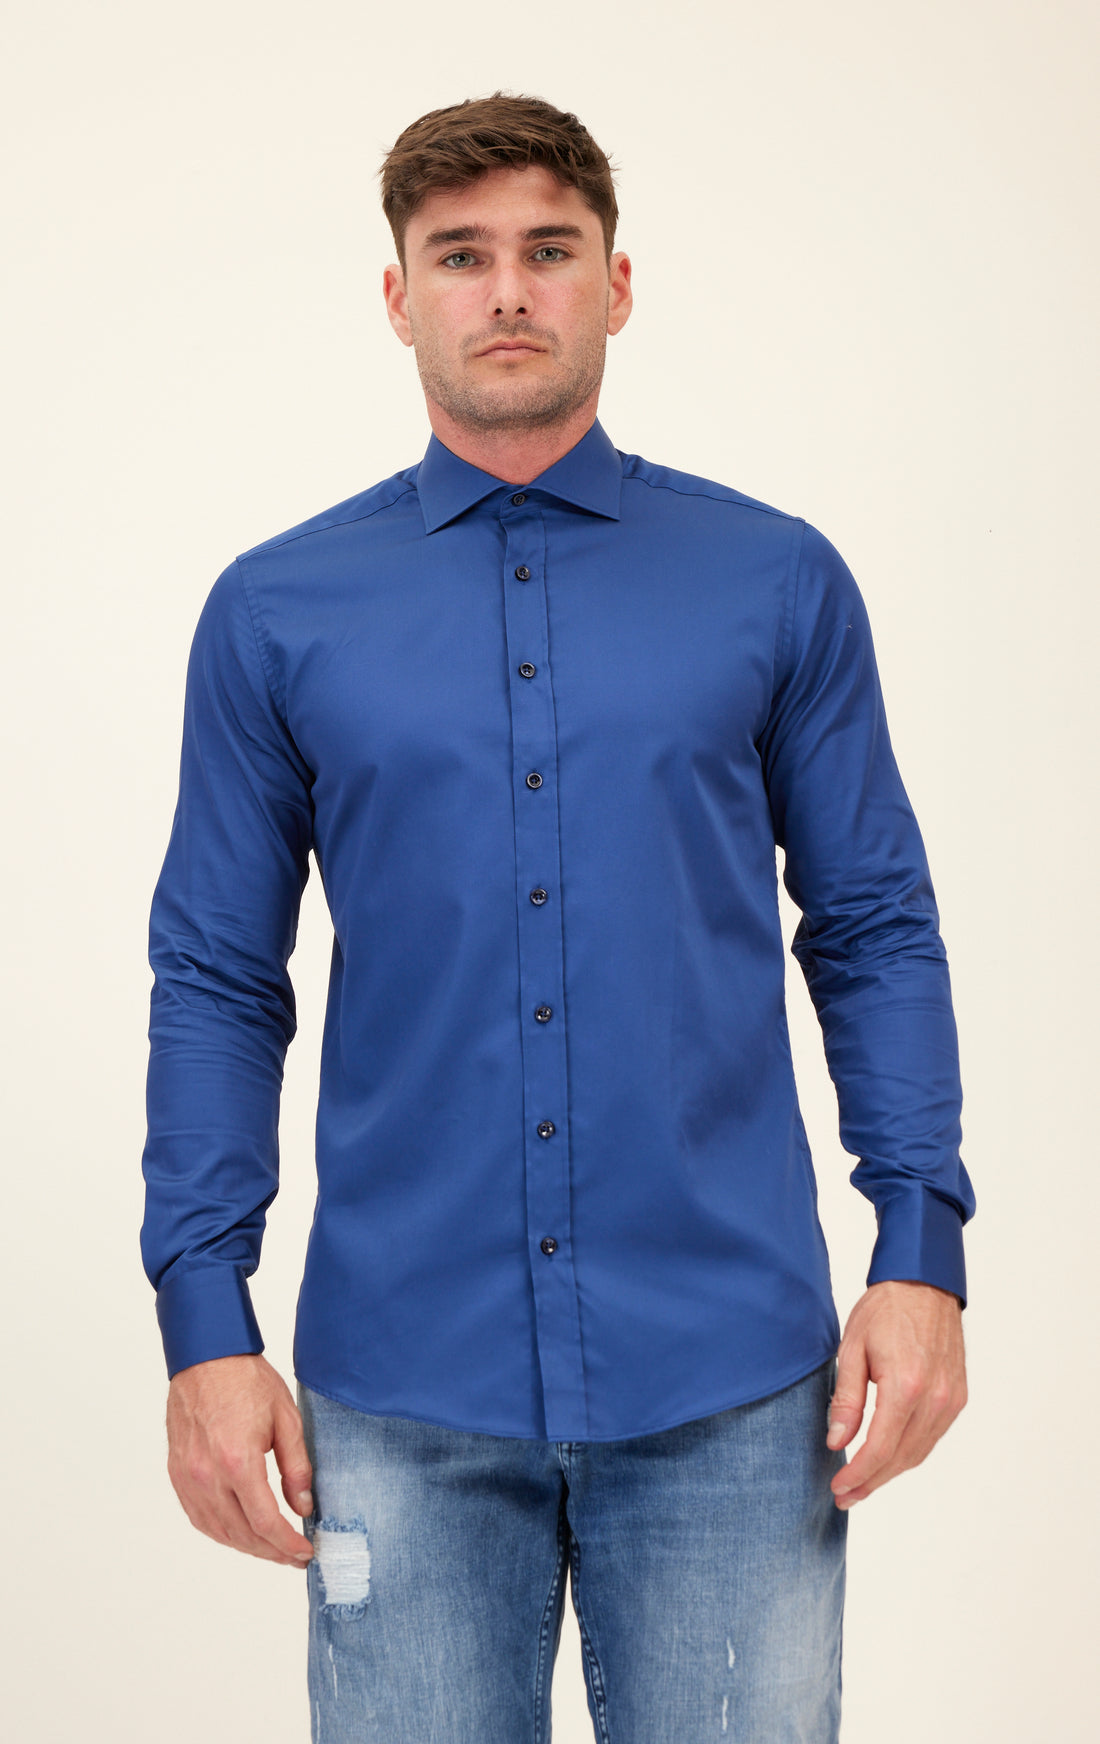 Pure Cotton Spread Collar Fitted Dress Shirt - Navy